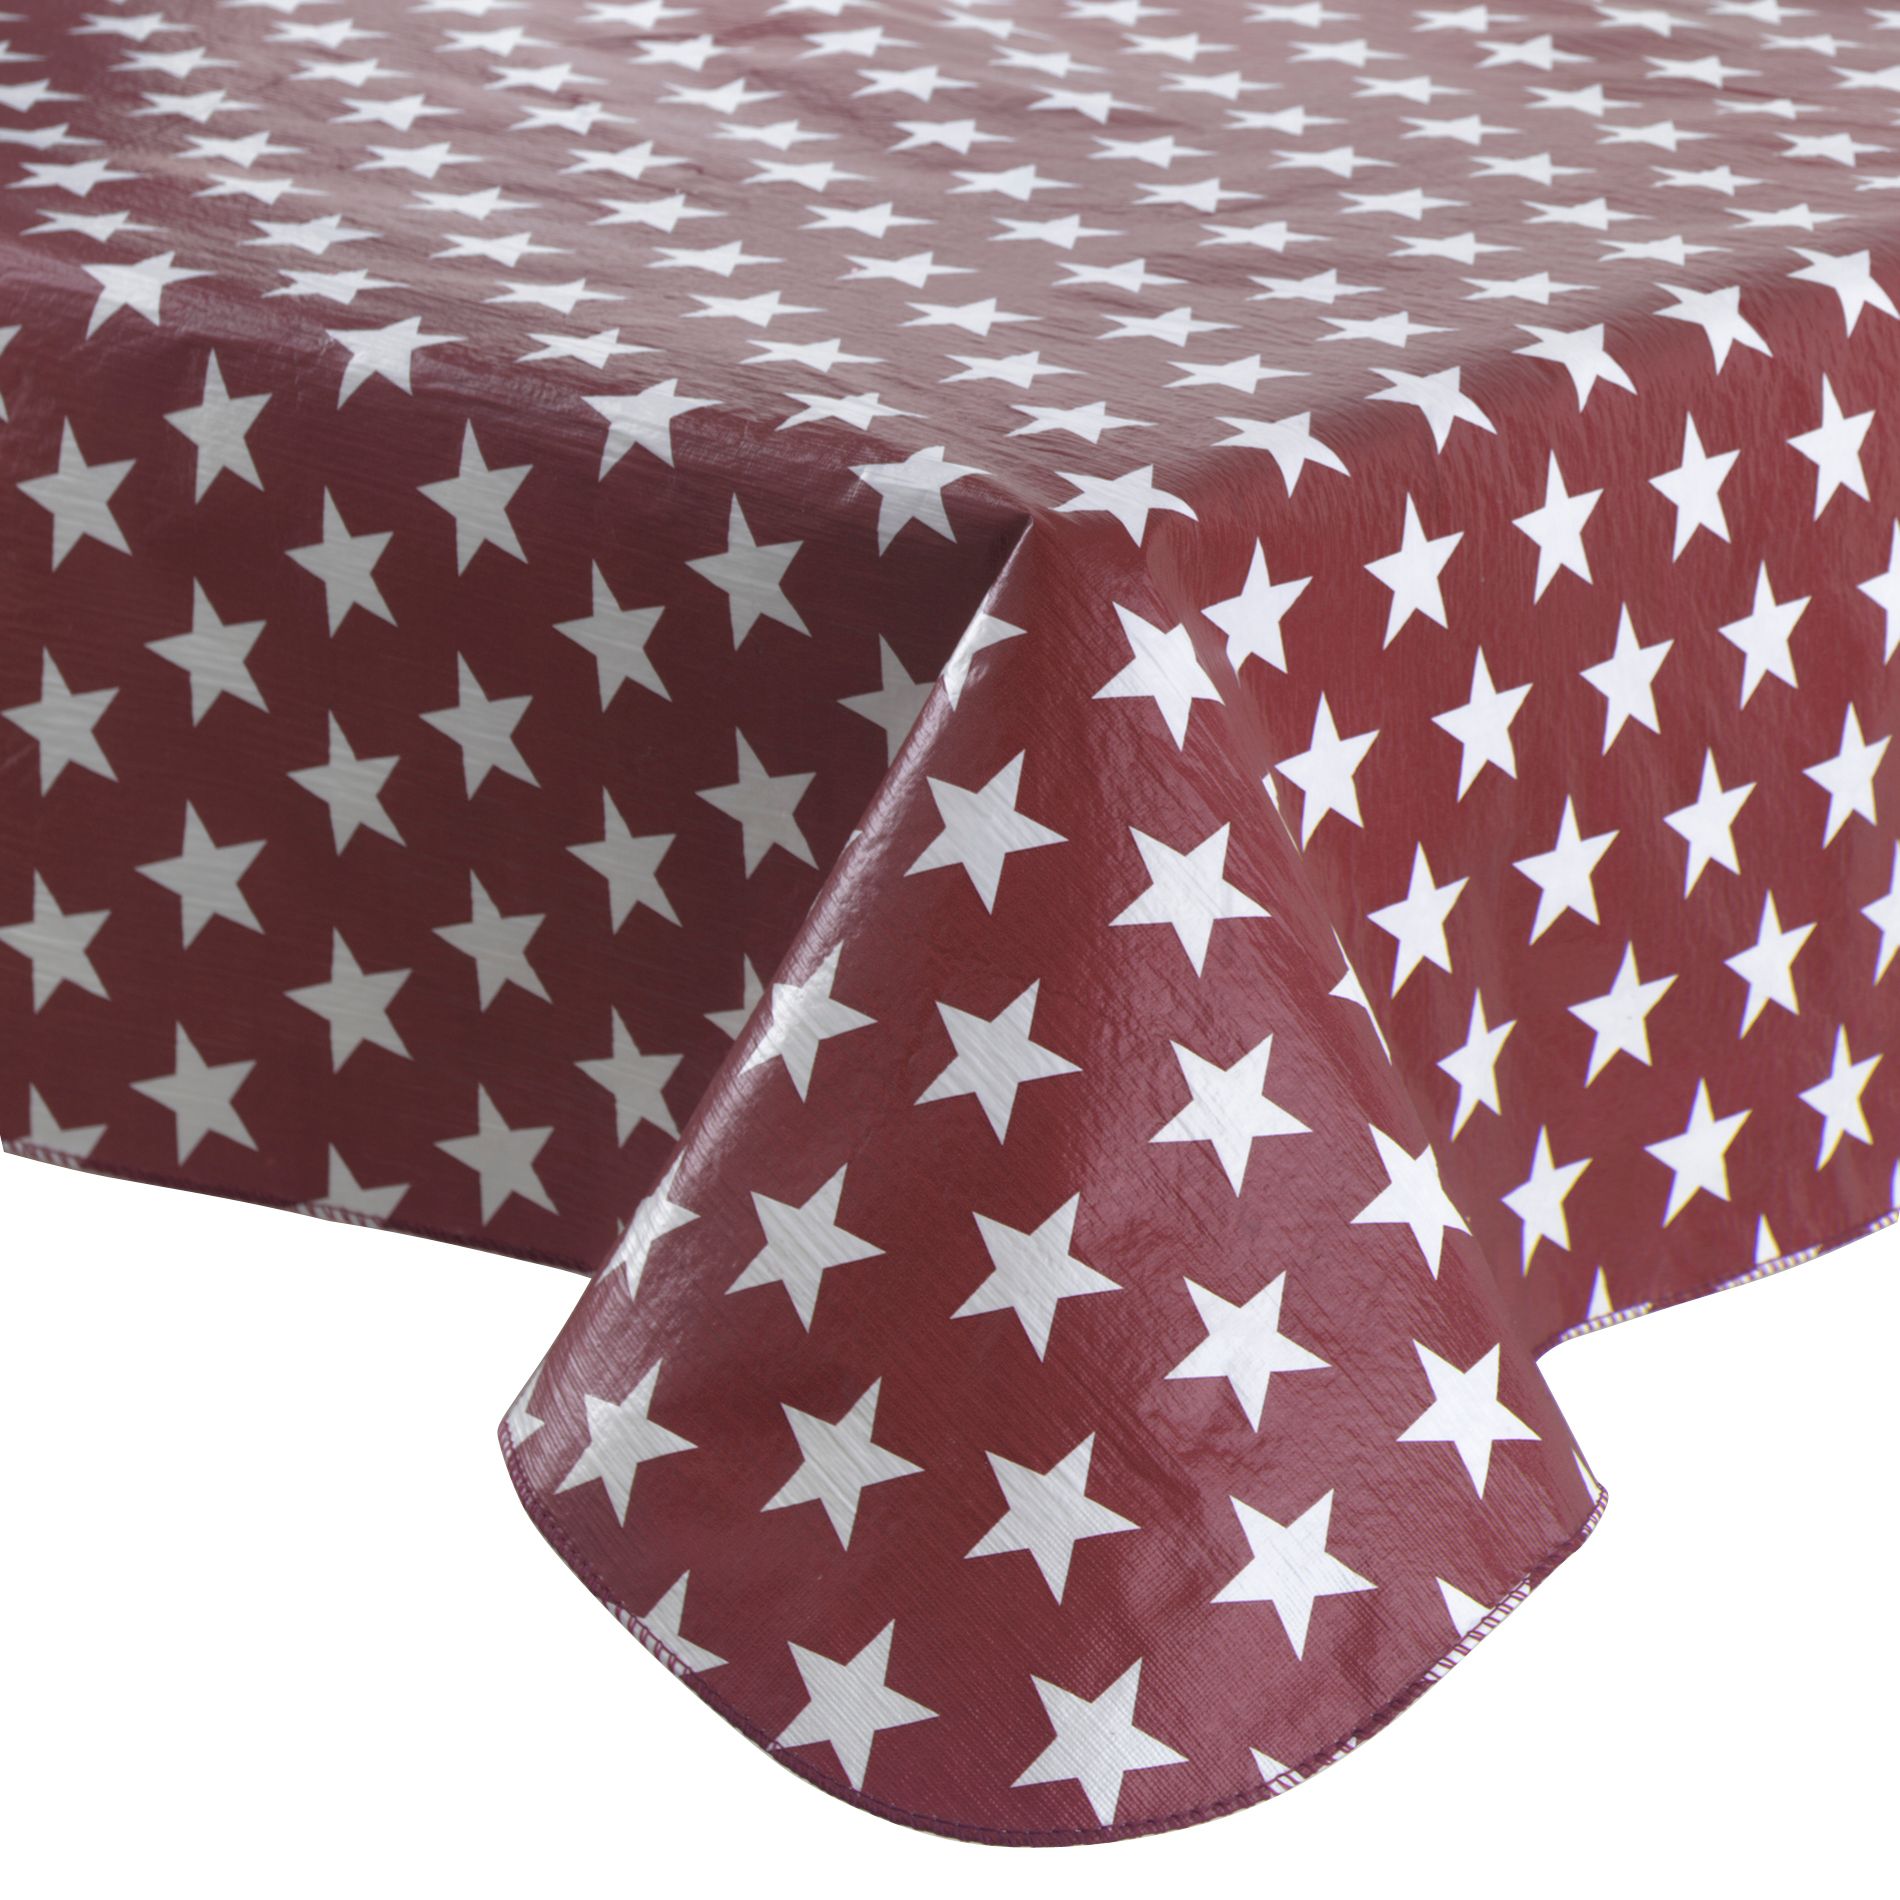 Backyard Party Americana Red with Stars Vinyl Tablecloth